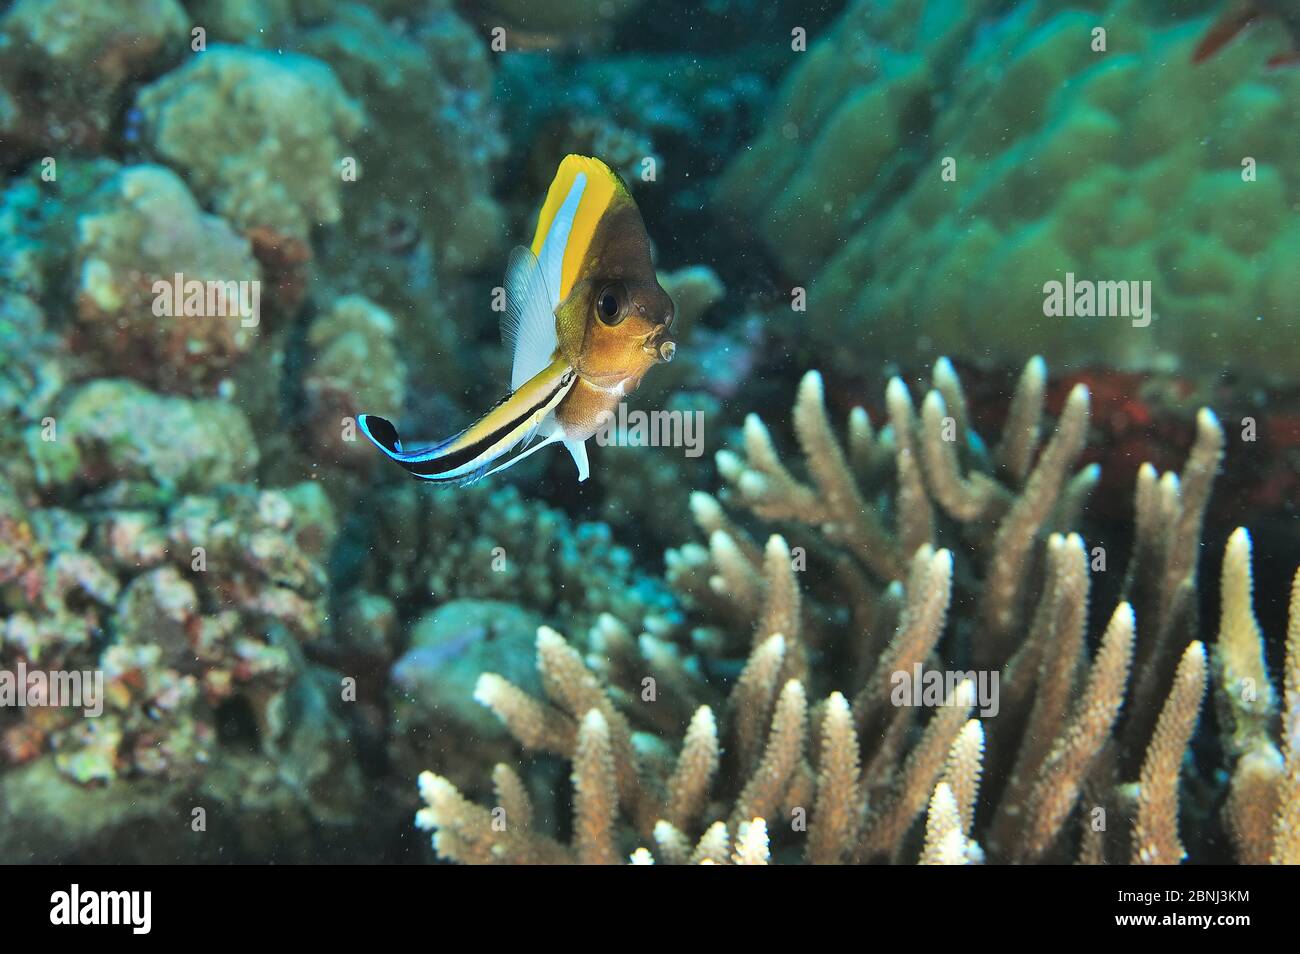 Pyramid butterflyfish (Hemitaurichthys polylepis) being cleaned by a common cleanerfish (Labroides dimidiatus) Palau, Philippine Sea Stock Photo